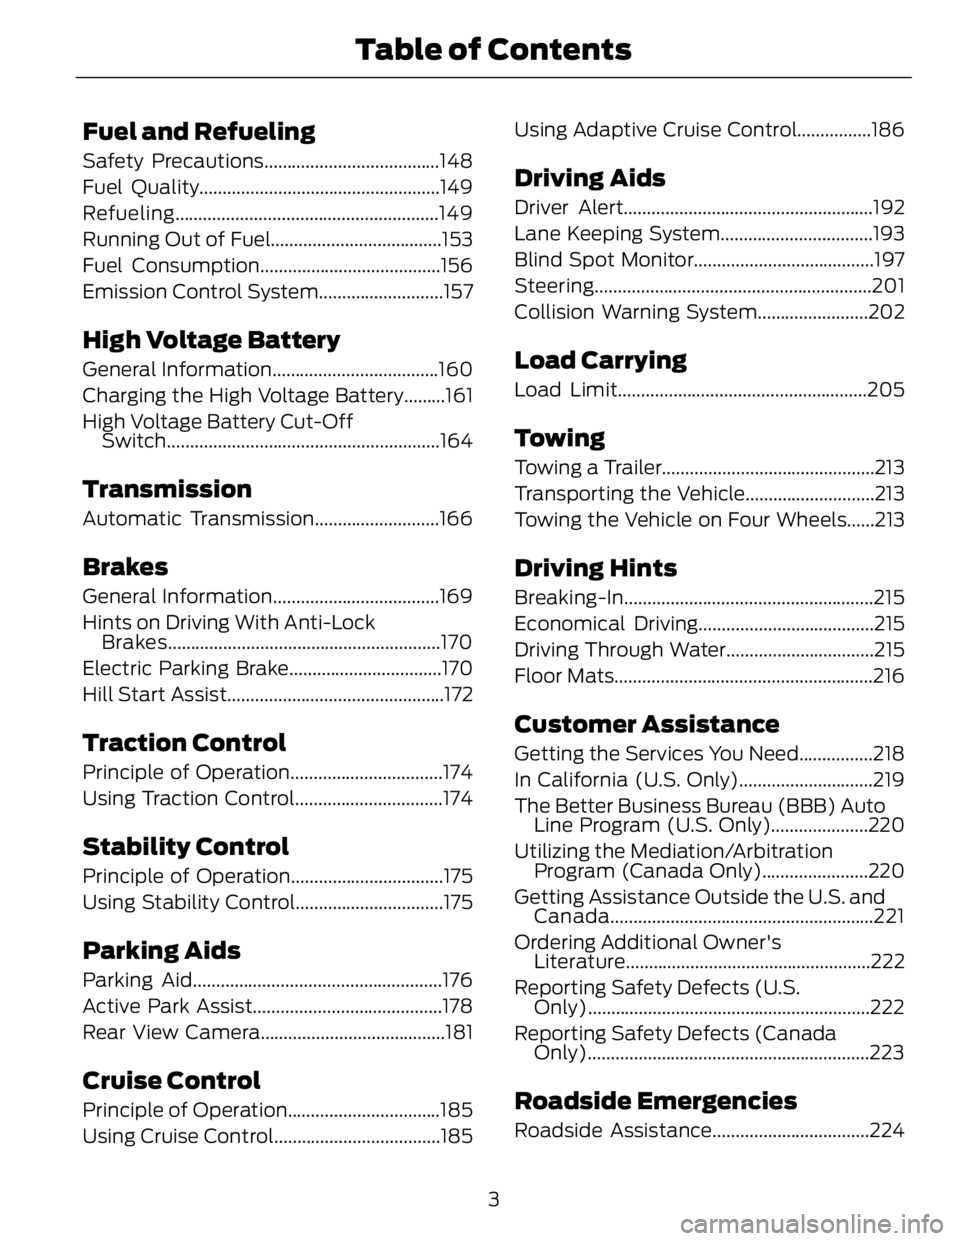 FORD FUSION HYBRID 2014  Owners Manual Fuel and Refueling Safety Precautions......................................148
Fuel Quality....................................................149
Refueling ...........................................